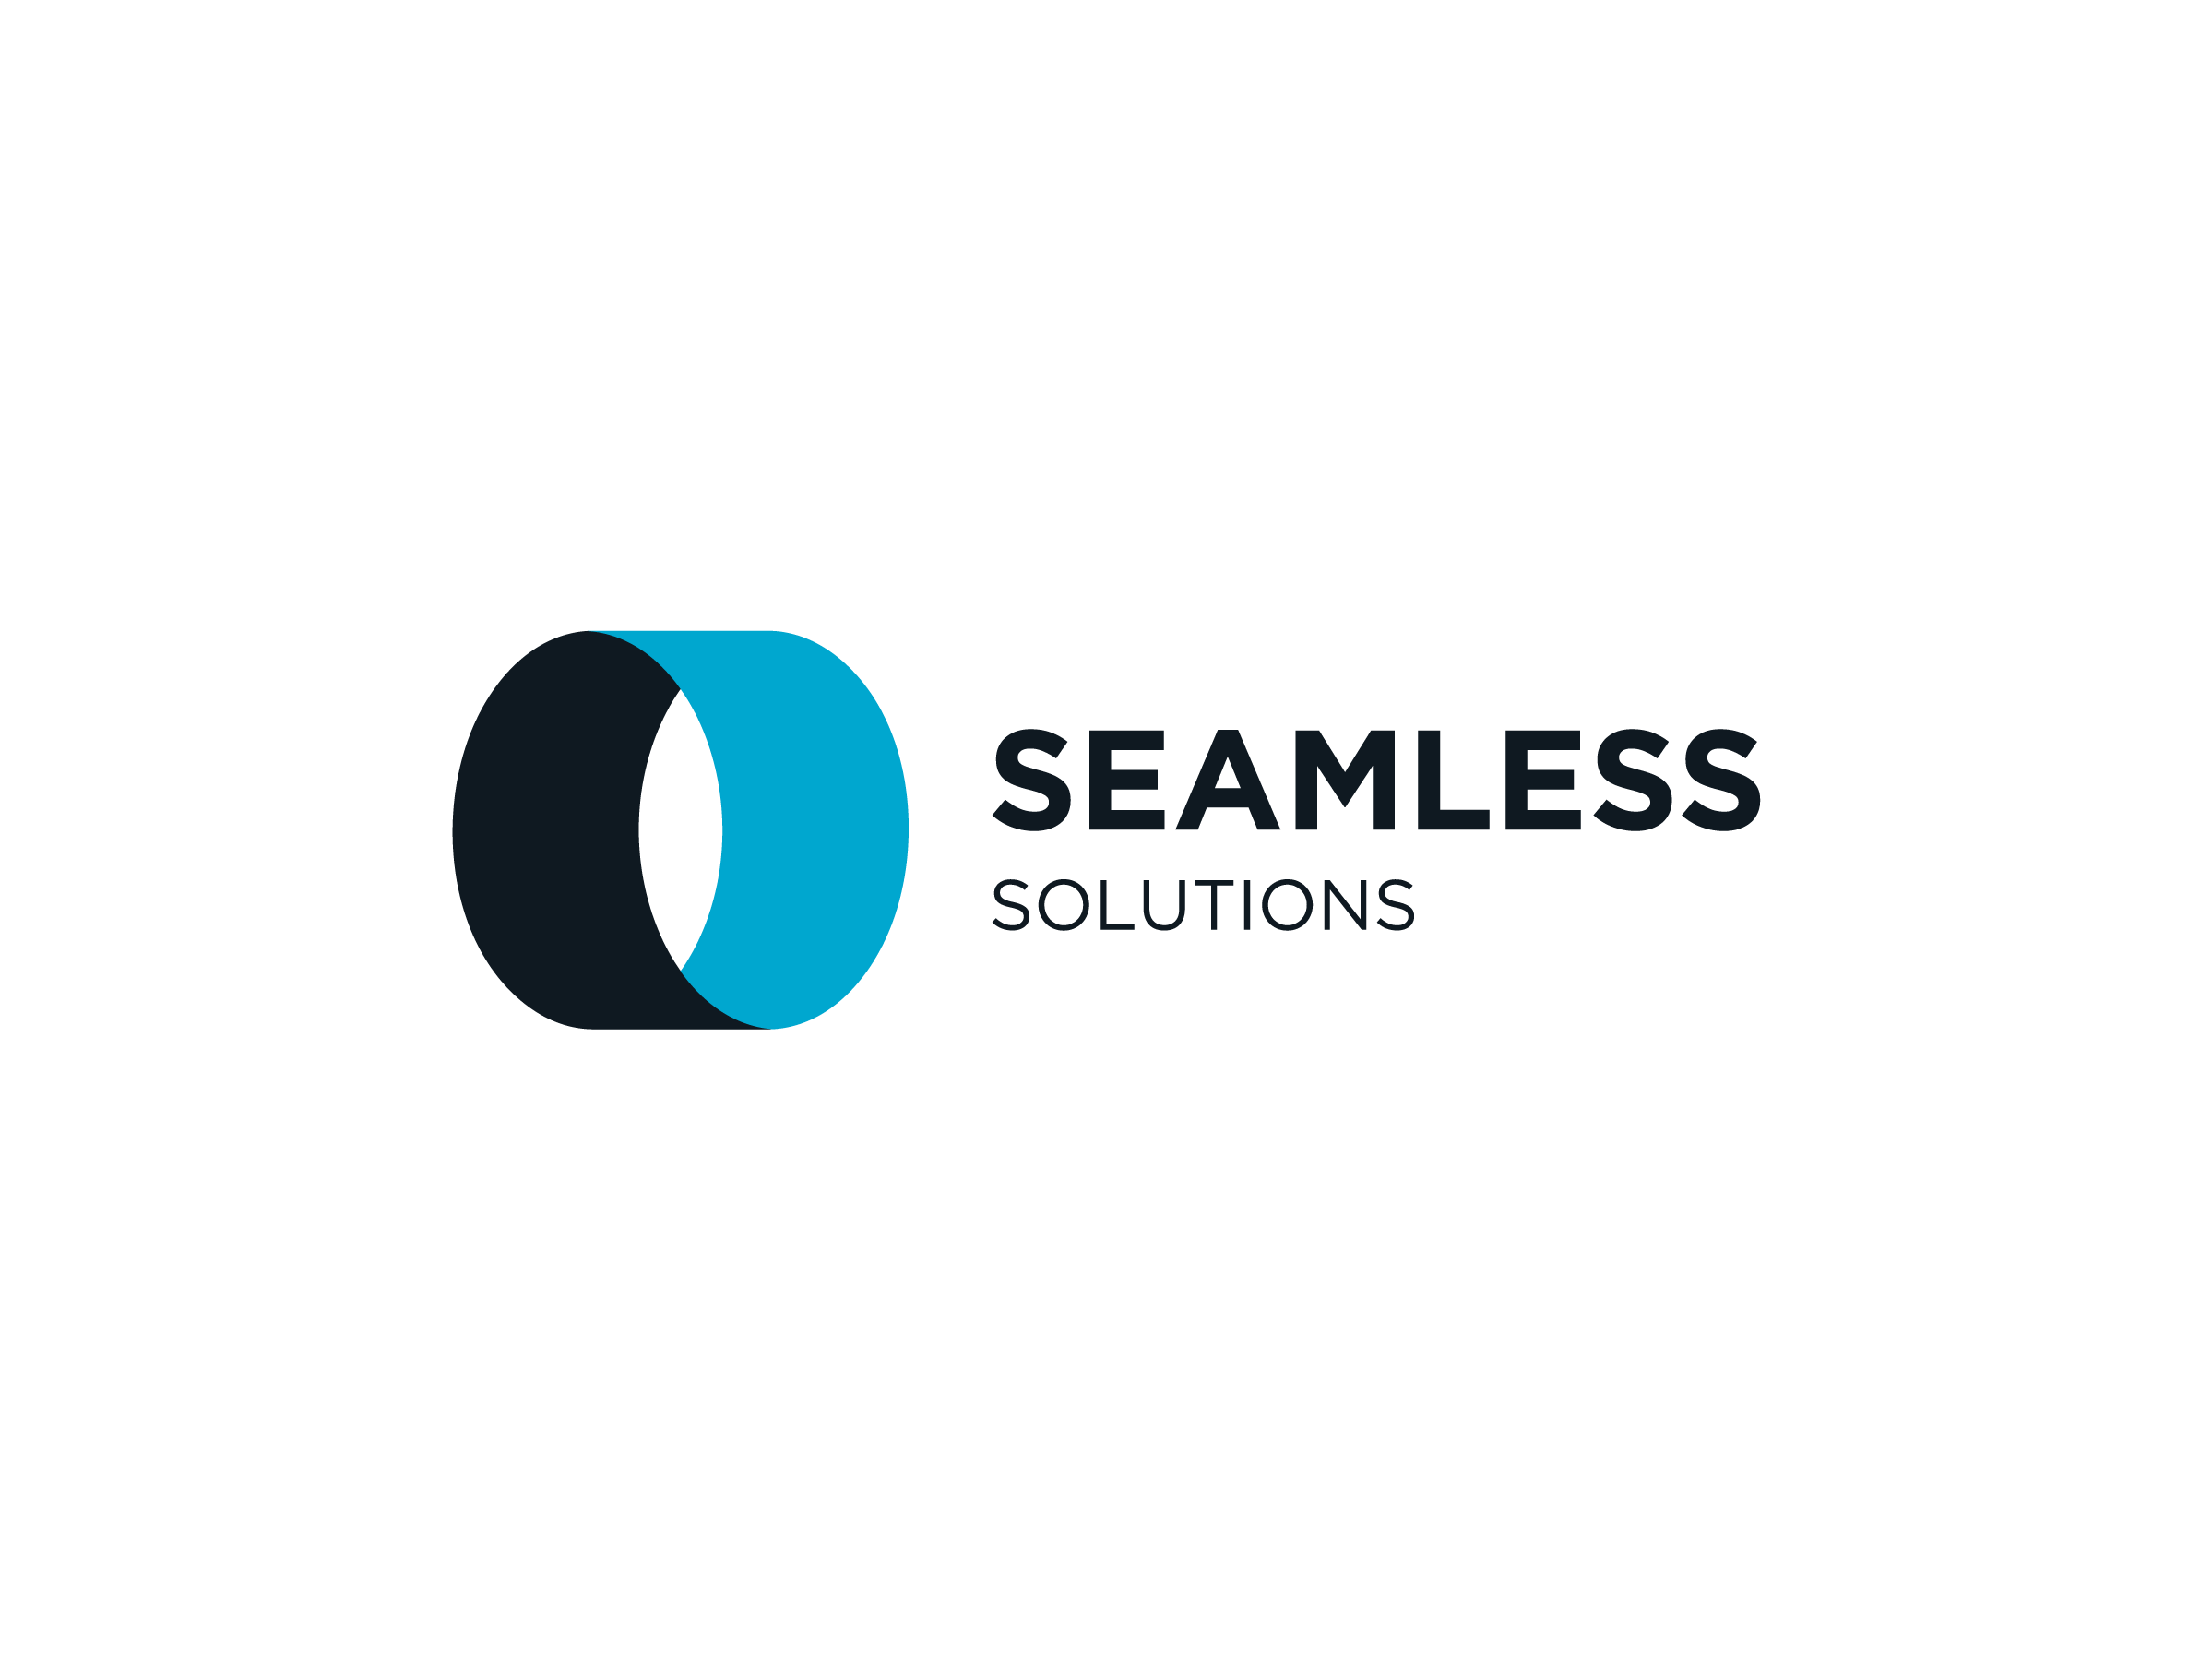 About Seamless Solutions